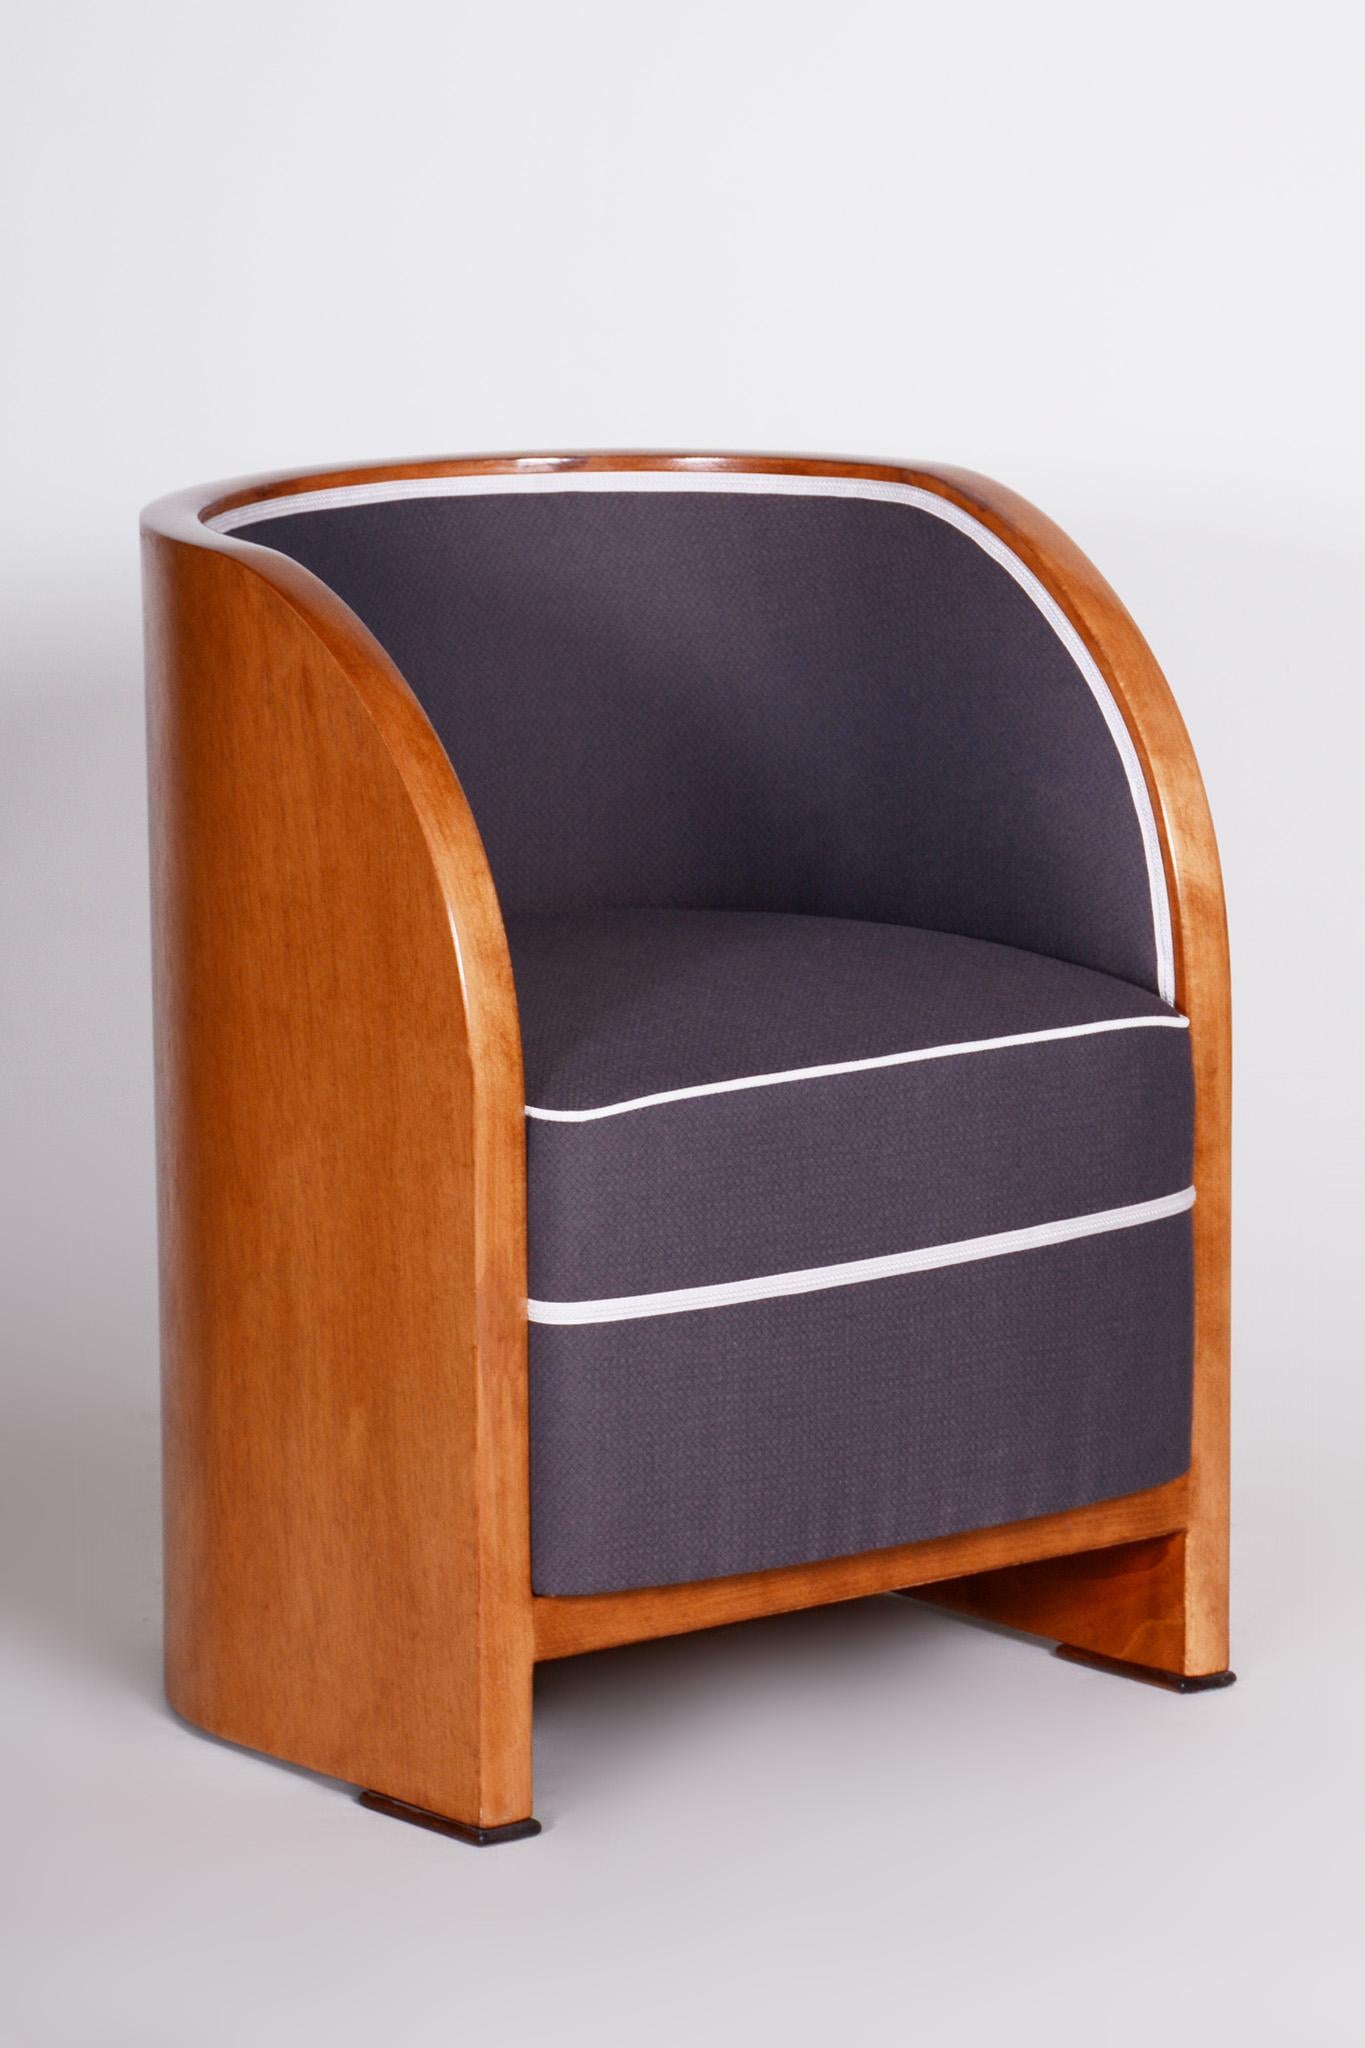 French Restored Art Deco Armchair, Mahogany Veneer, Beech Solid Wood, France, 1940s For Sale